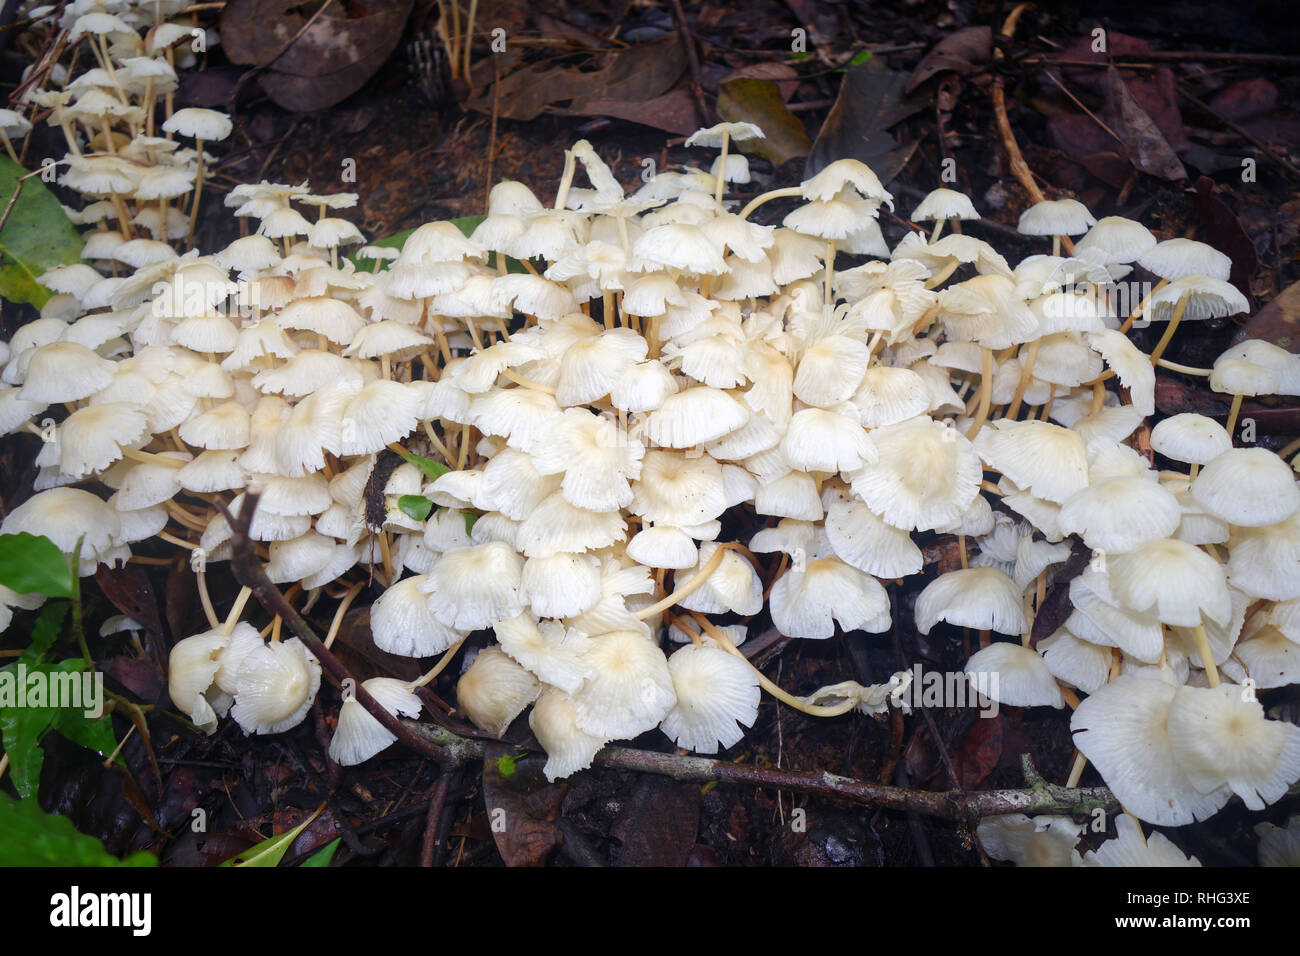 Mushrooms sprouting in rainforest leaf litter during wet season, Crystal Cascades, Cairns, Queensland, Australia Stock Photo